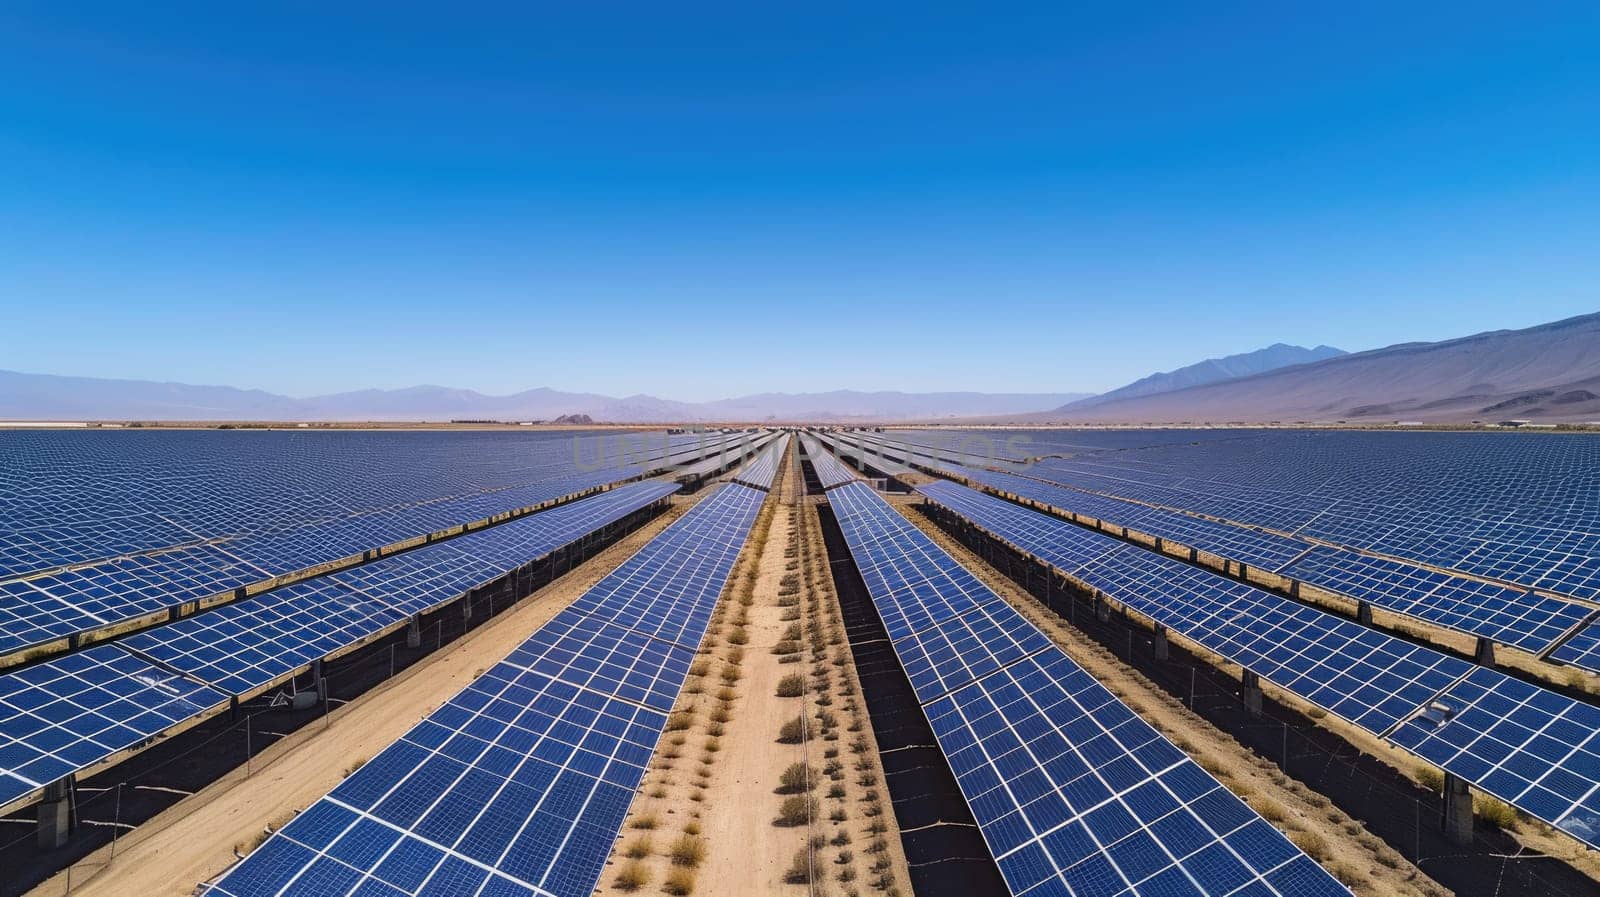 A vast solar panel farm stretches across a desert landscape, harnessing the power of the sun for renewable energy. AIG41 by biancoblue